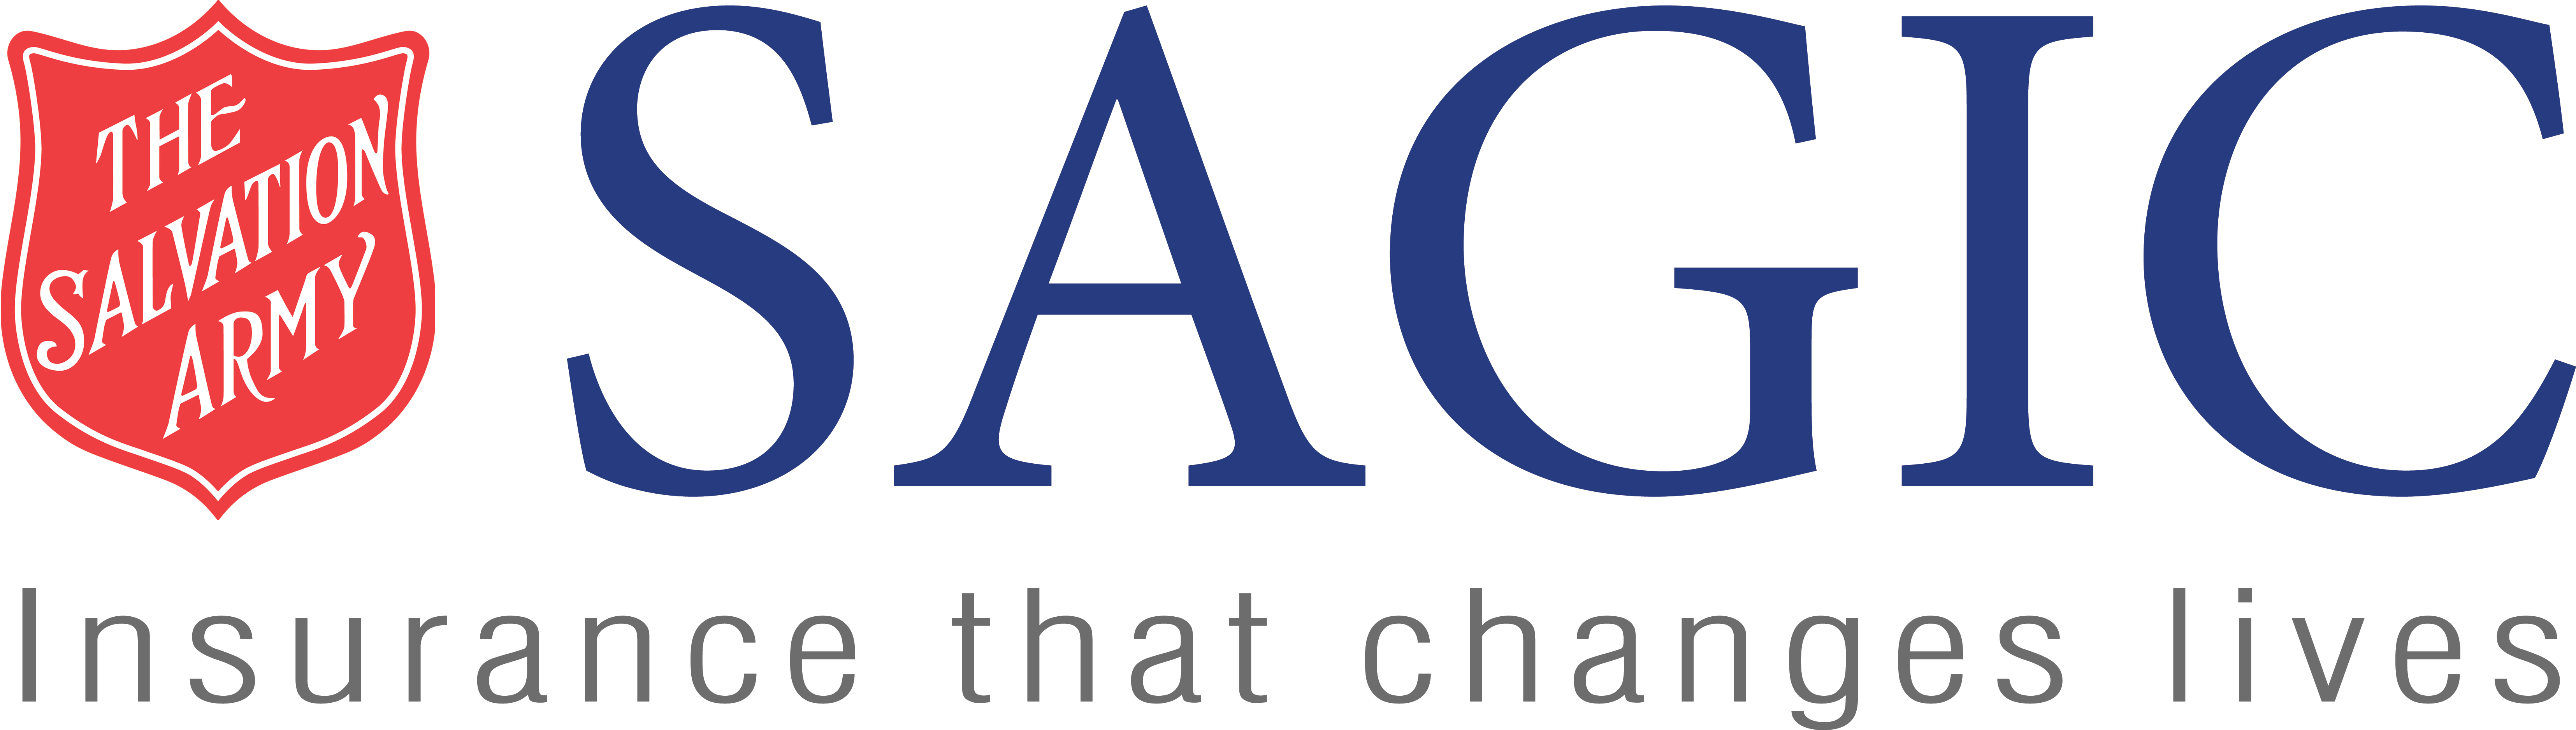 Ethical insurance: Choice Insurance Agency Partner with SAGIC (Salvation Army General Insurance Company Ltd)